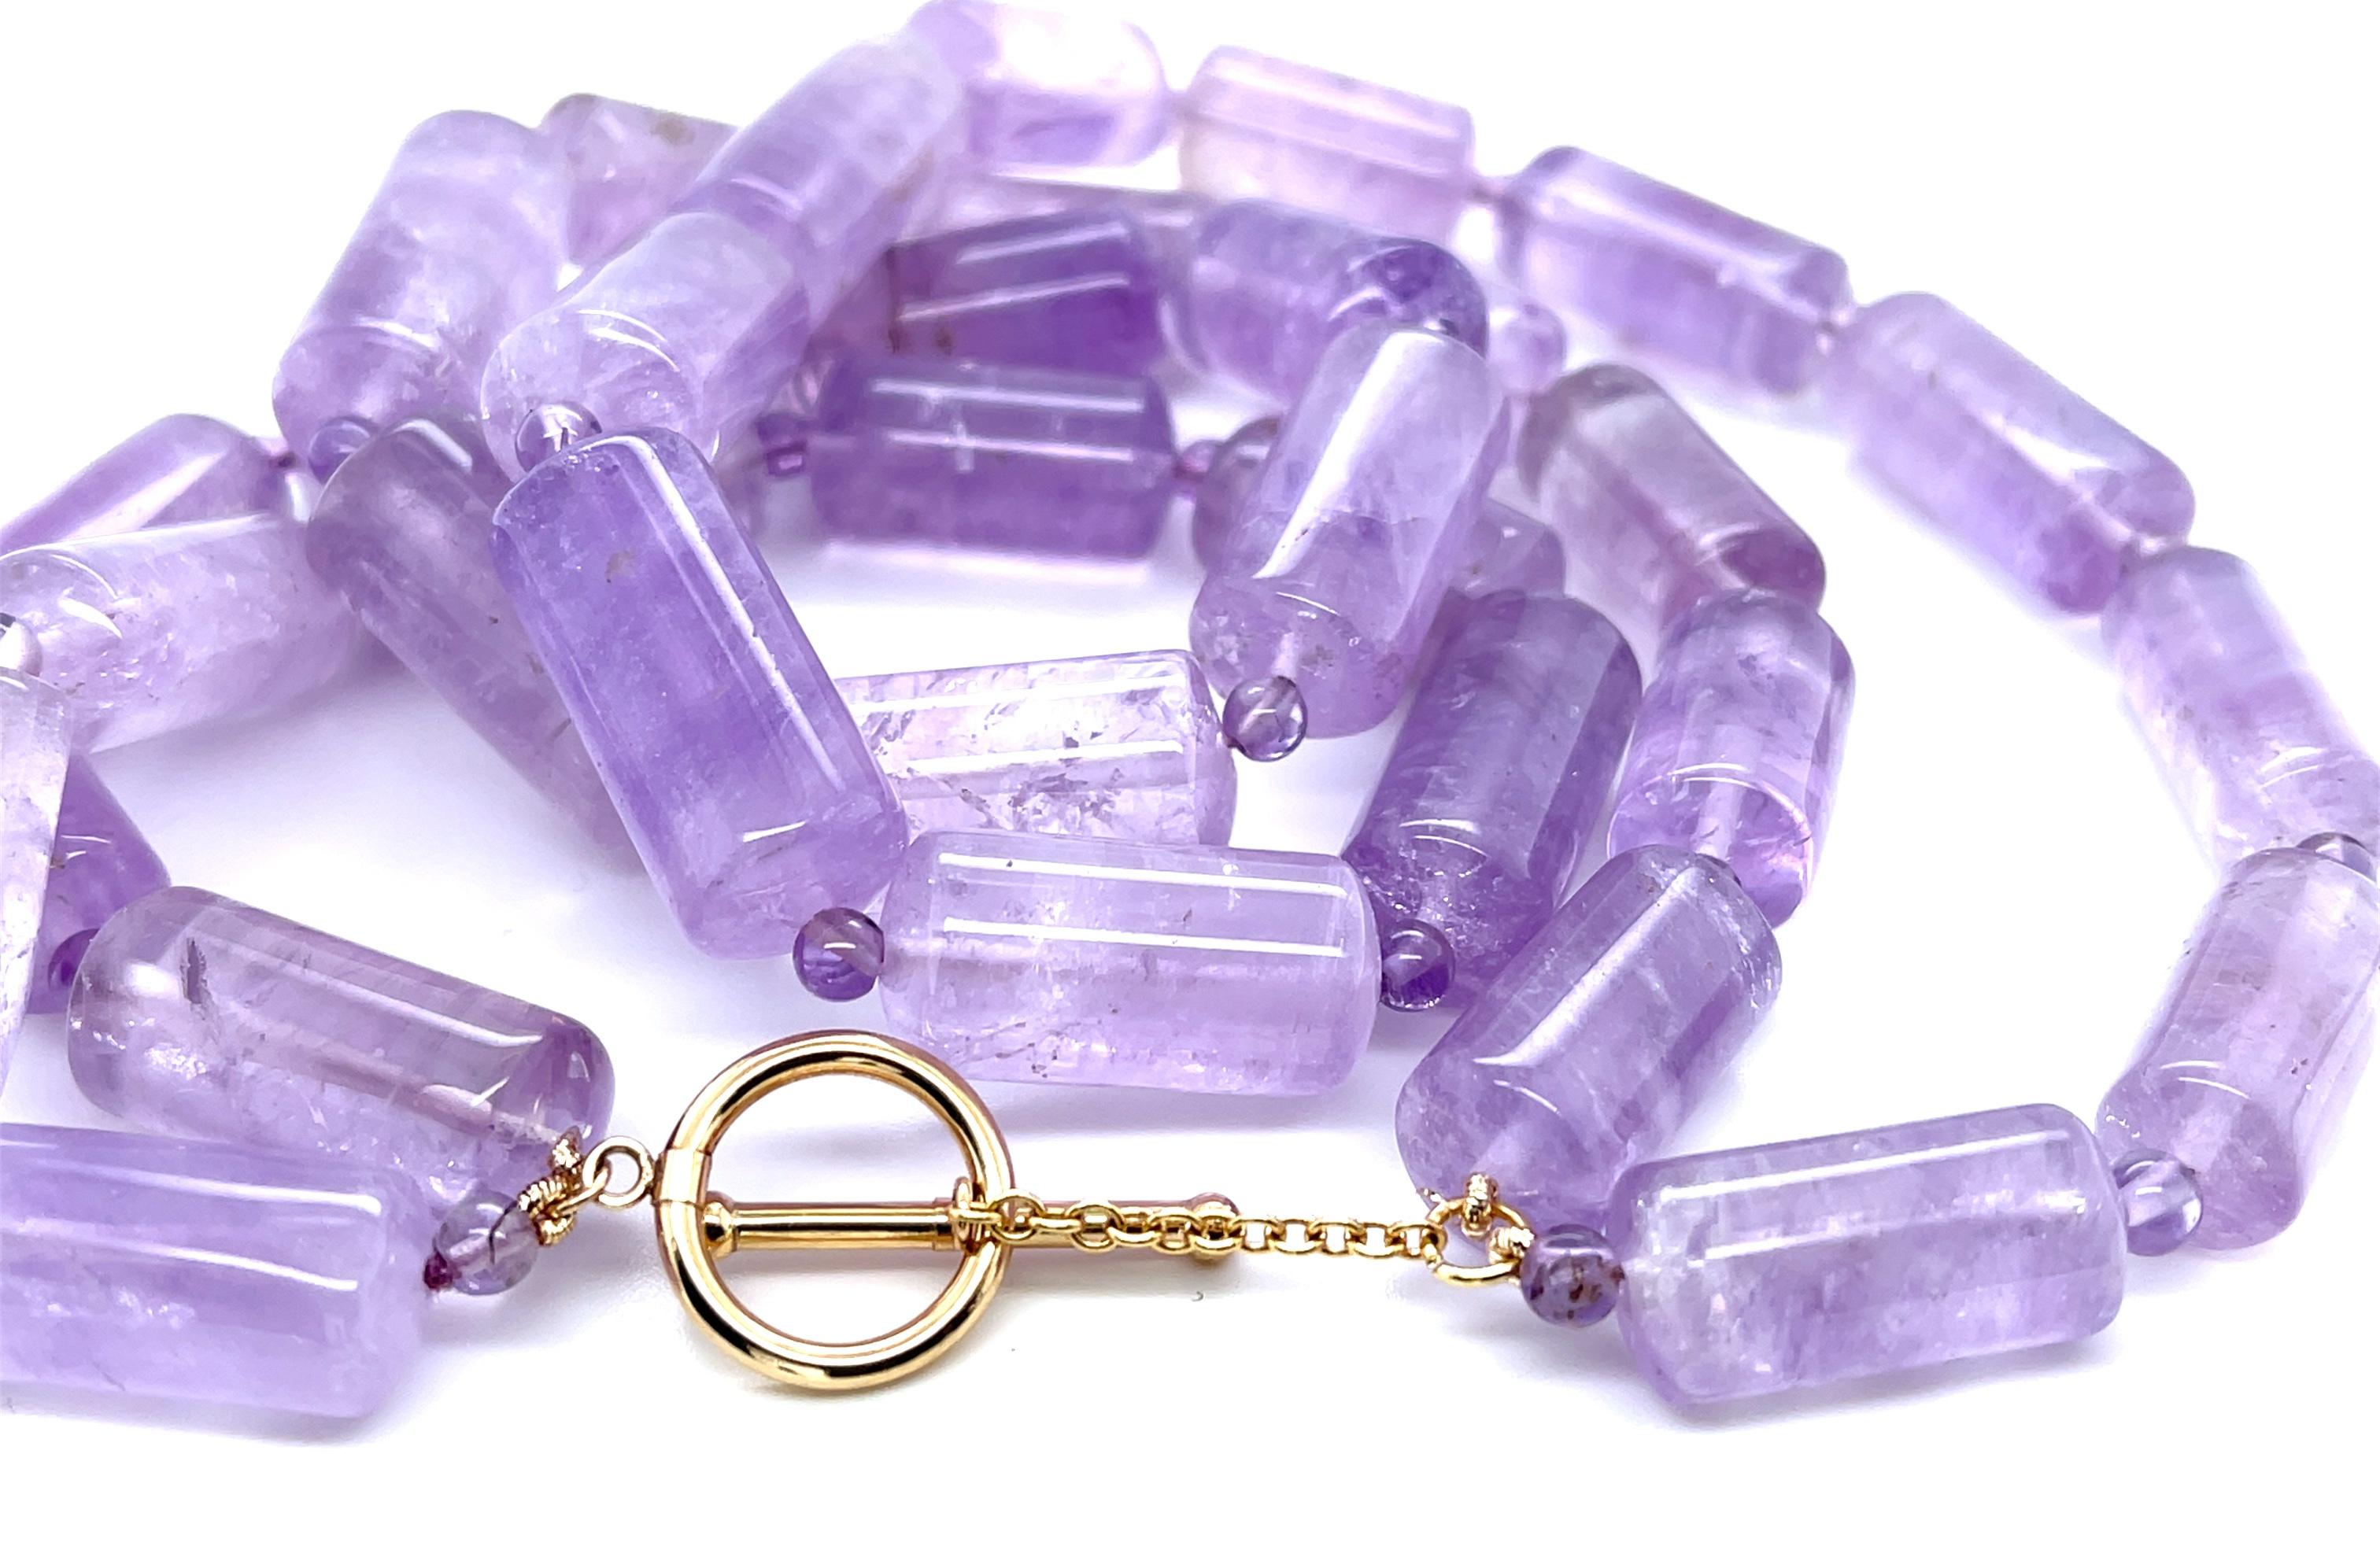 Bead Rose de France Amethyst Cylinder Necklace, Double Strand with 14k Yellow Gold